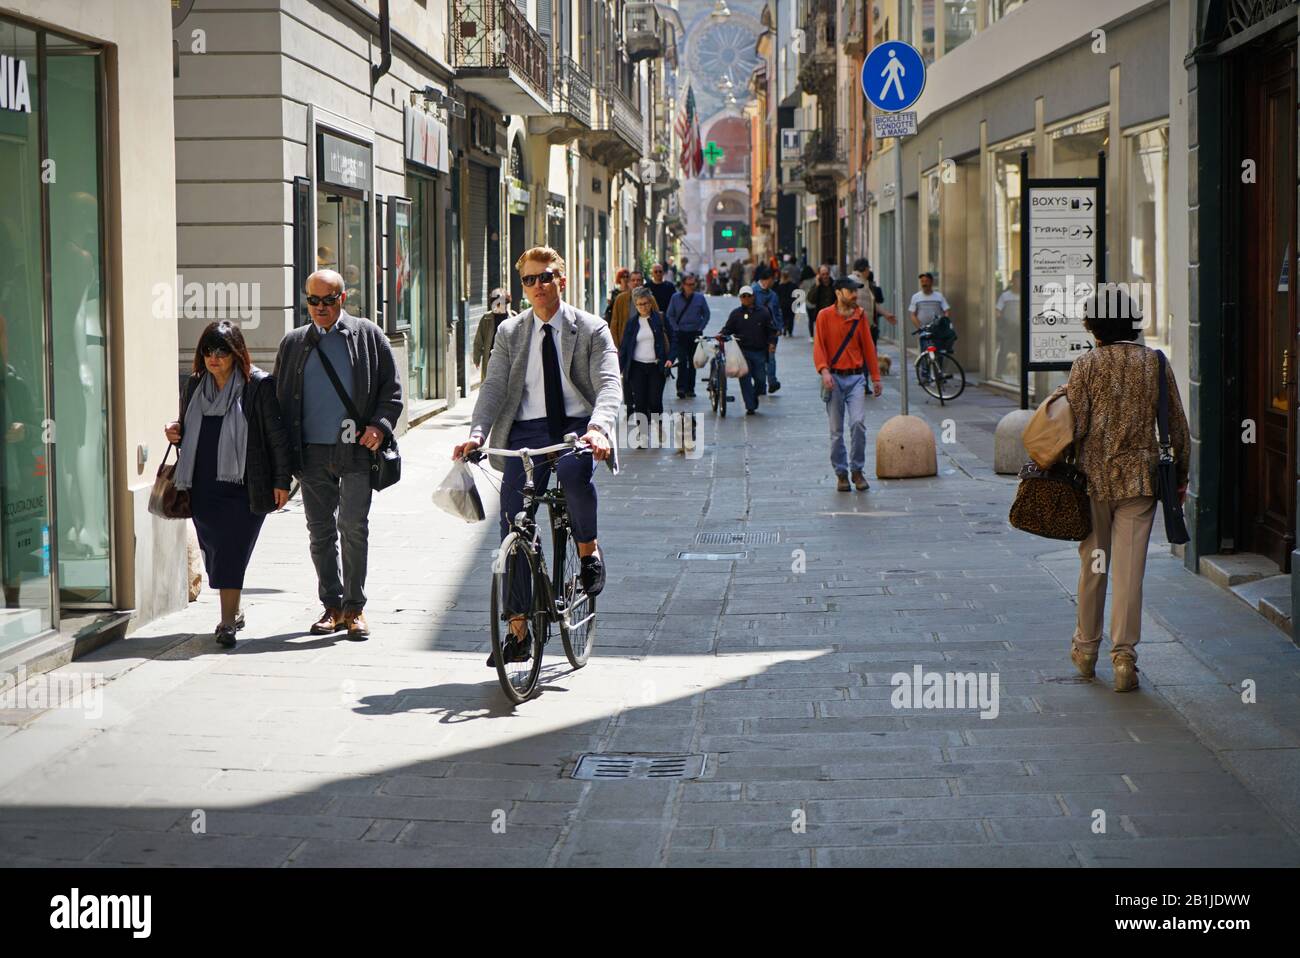 The car-free historic centre of Piacenza, with many bicycles and pedestrians. Piacenza, Italy - april 2019 Stock Photo